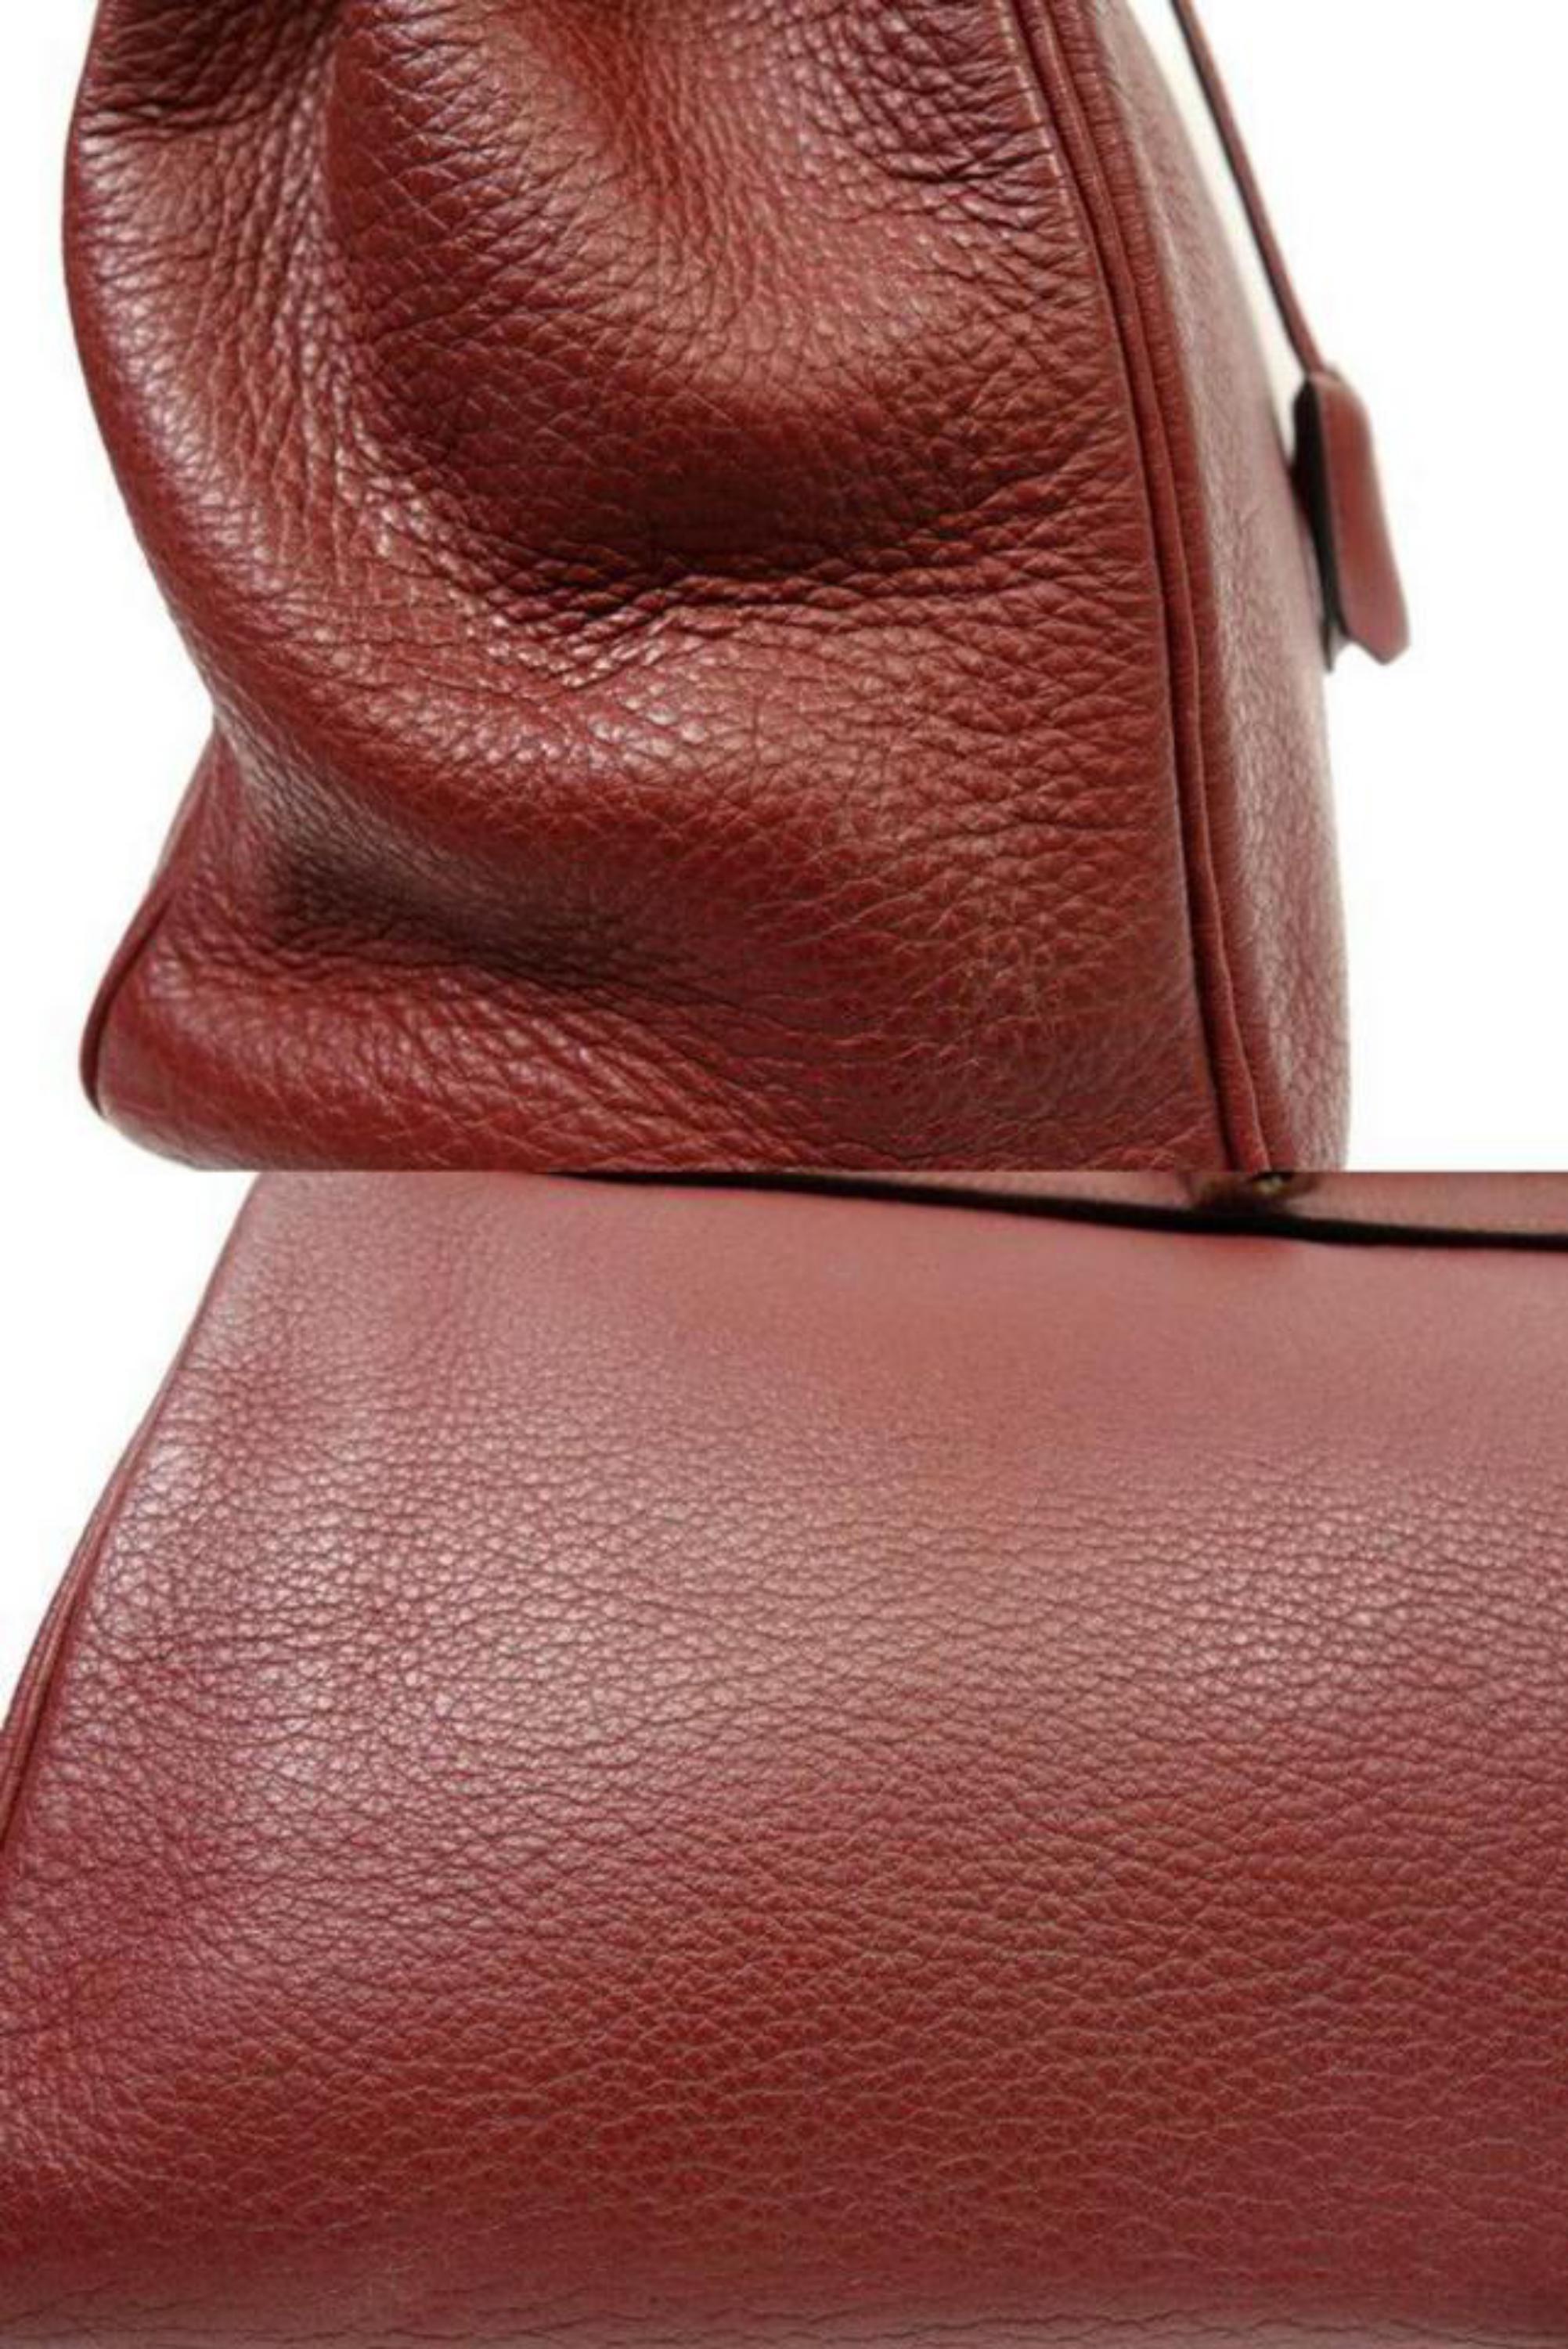 Hermès Kelly 35 227556 Rouge Ash Clemence Leather Satchel For Sale 2